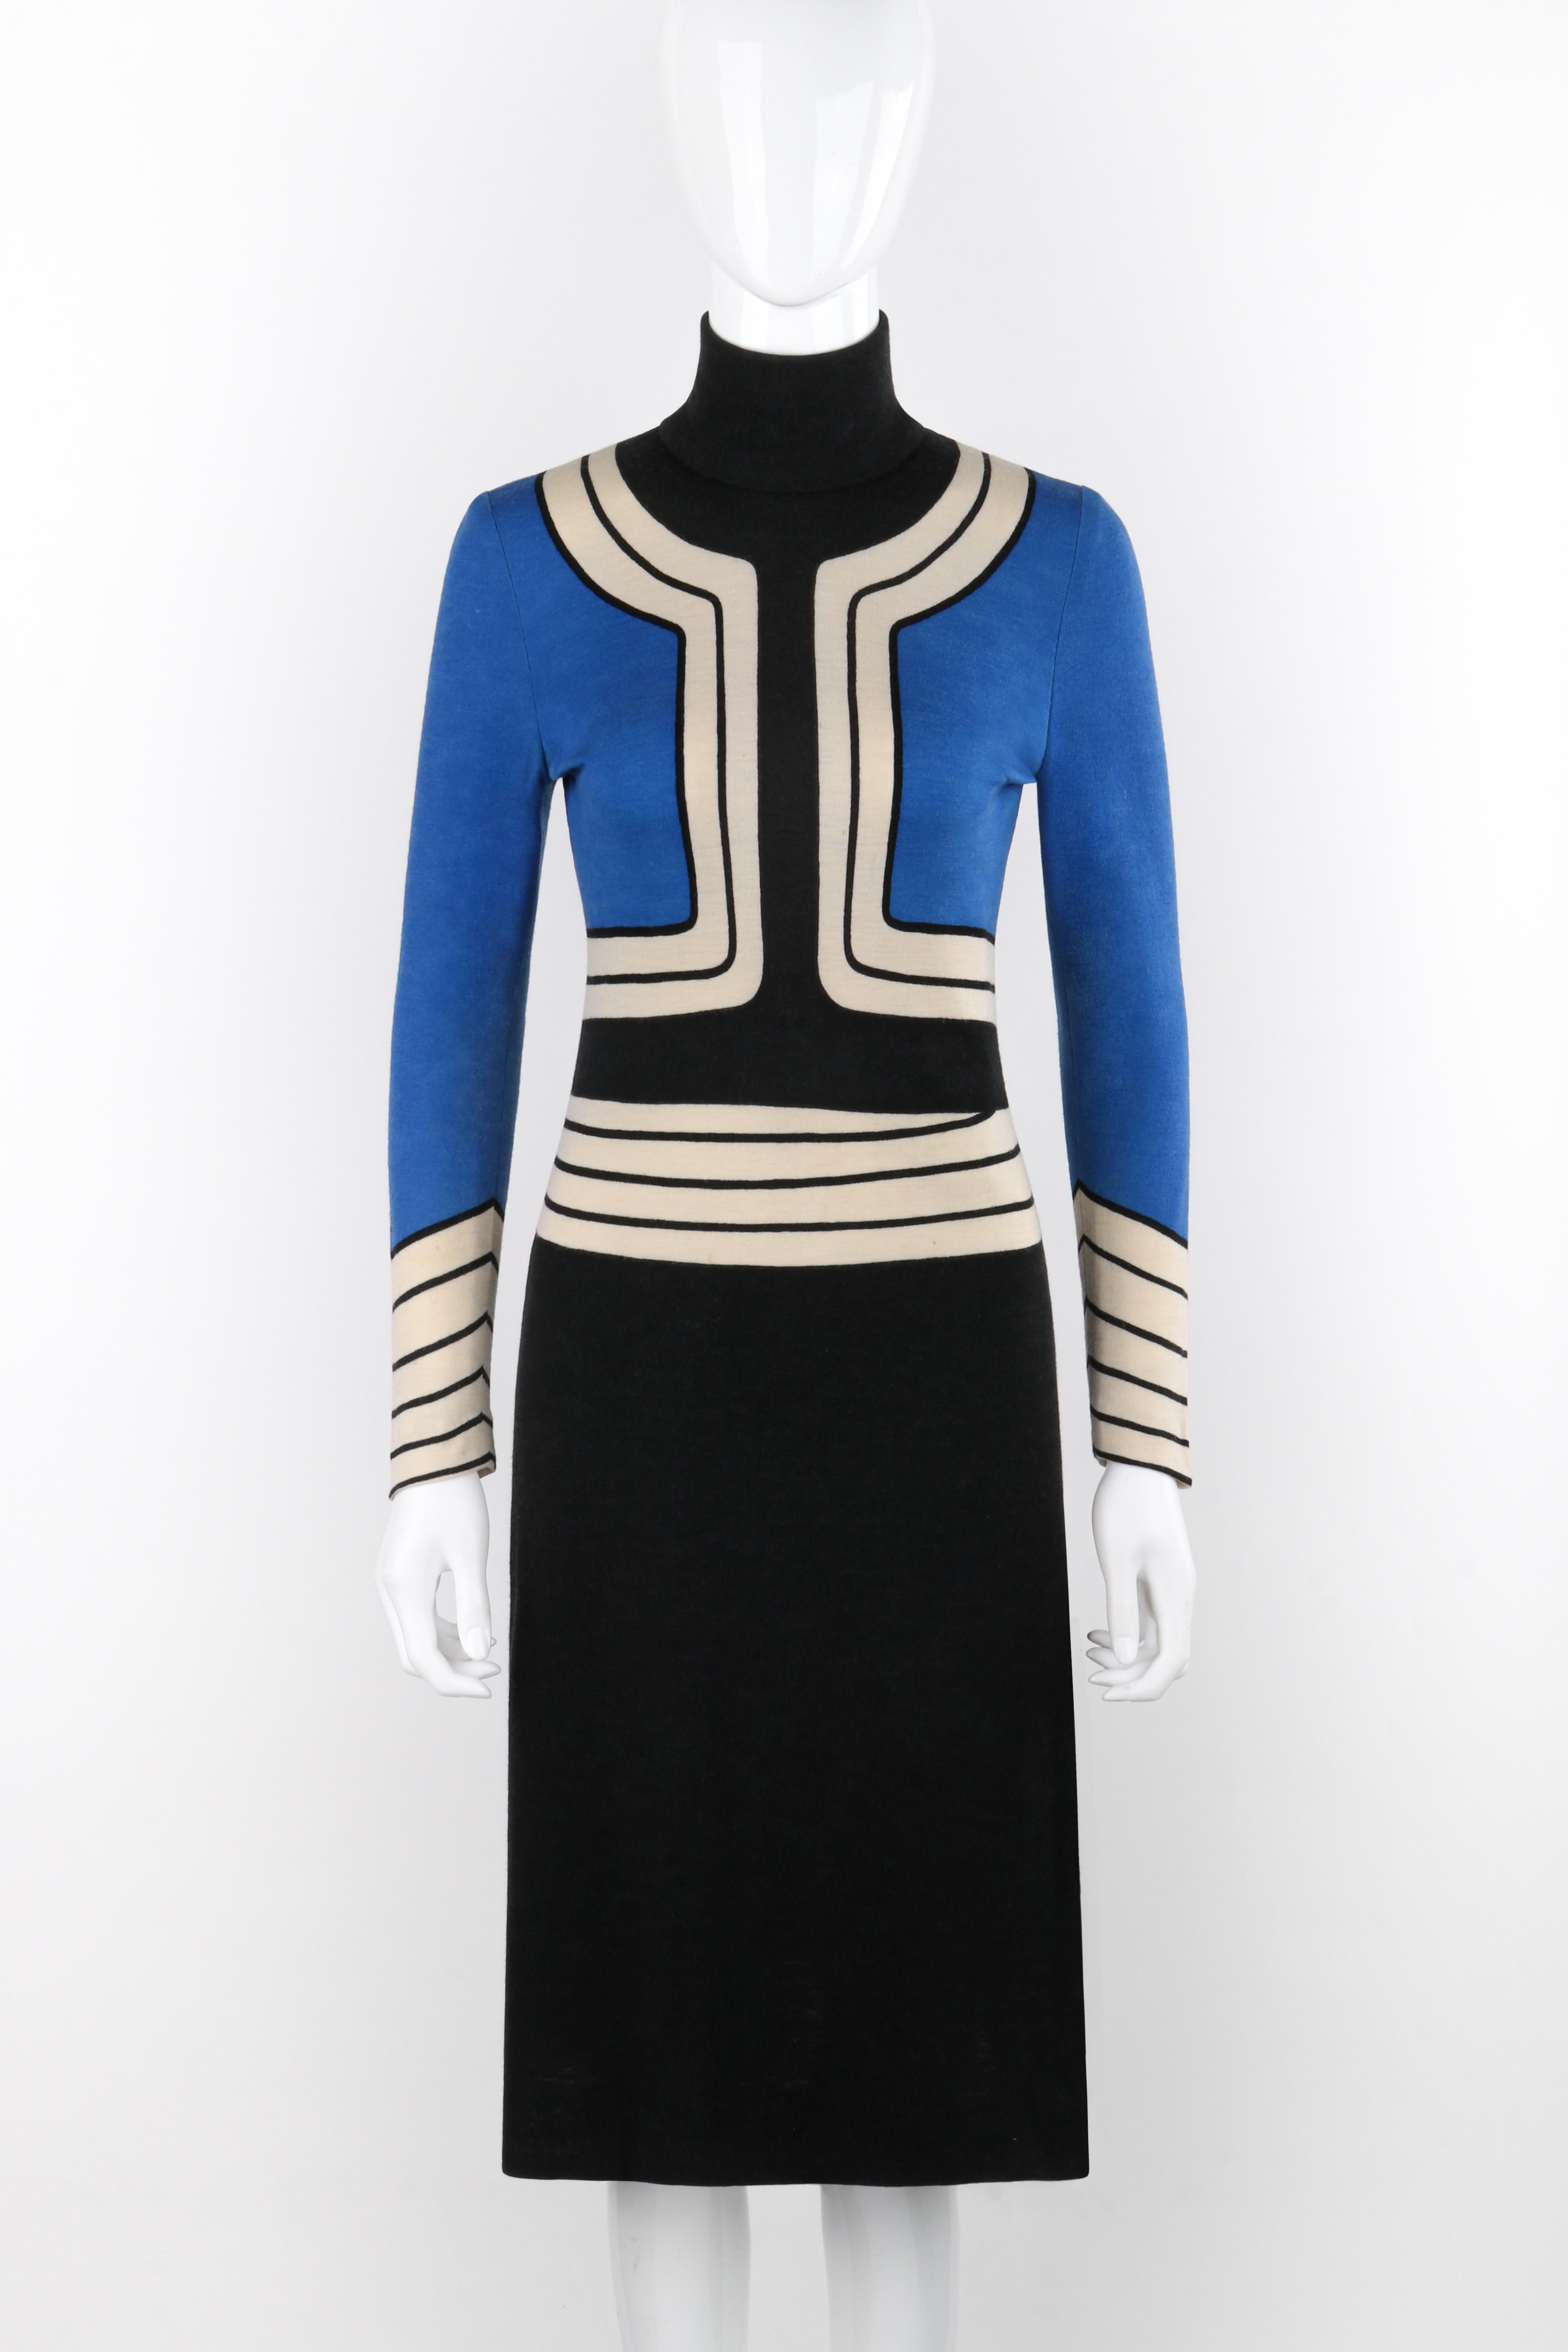 Brand / Manufacturer: Roberta Di Camerino
Circa: 1960s
Designer: Roberta Di Camerino
Style: Longsleeve turtleneck dress
Color(s): Shades of blue, white, black
Lined: No
Unmarked Fabric Content (feel of): Polyester (primary material), metal